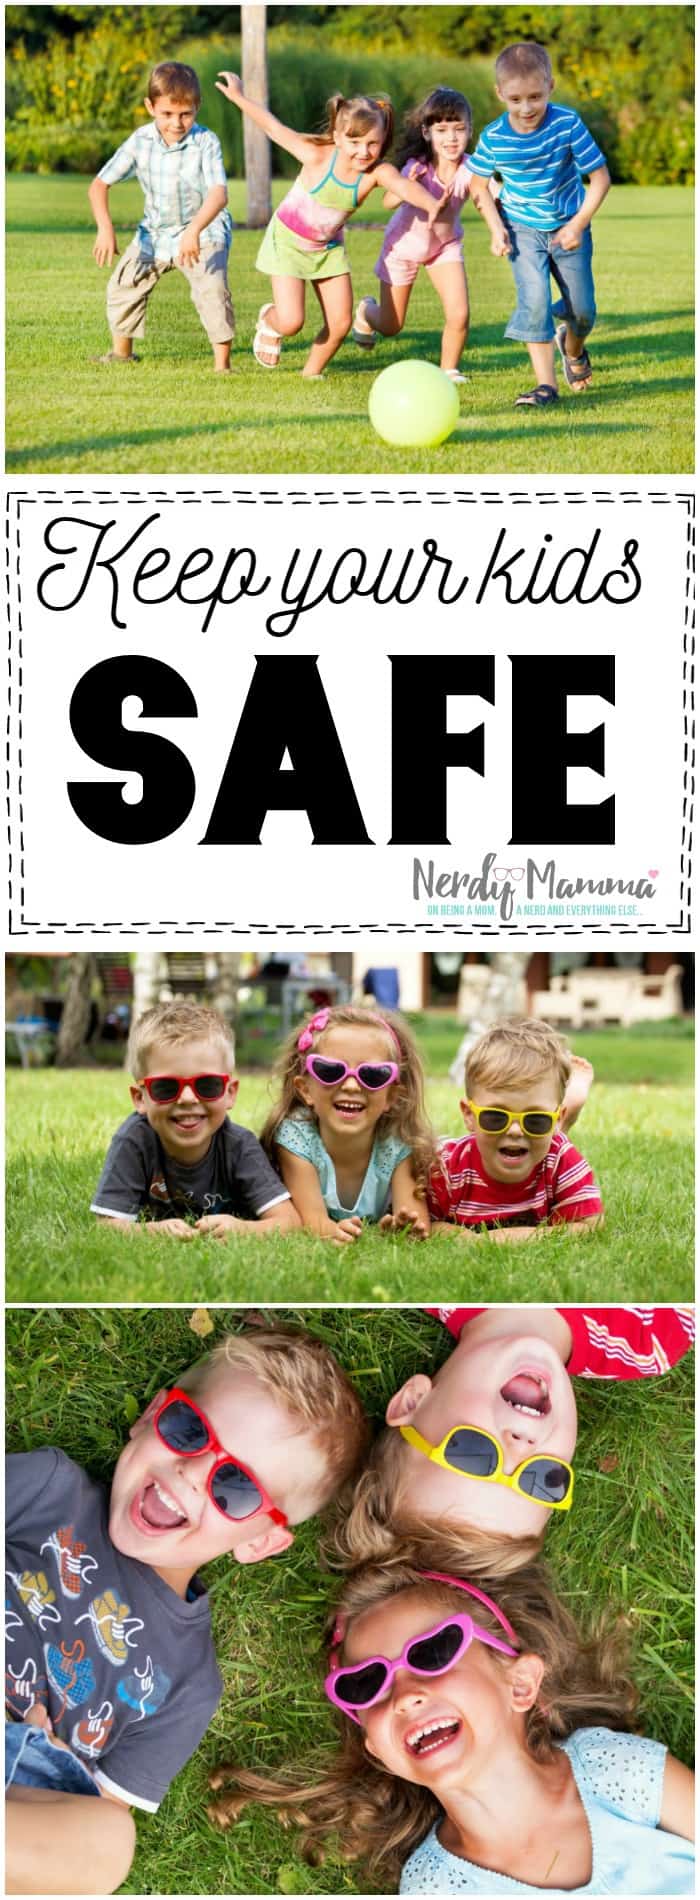 If I got this, I wouldn't need to be worried about where my kids are all the time. It's scary out there and I need to keep them safe.